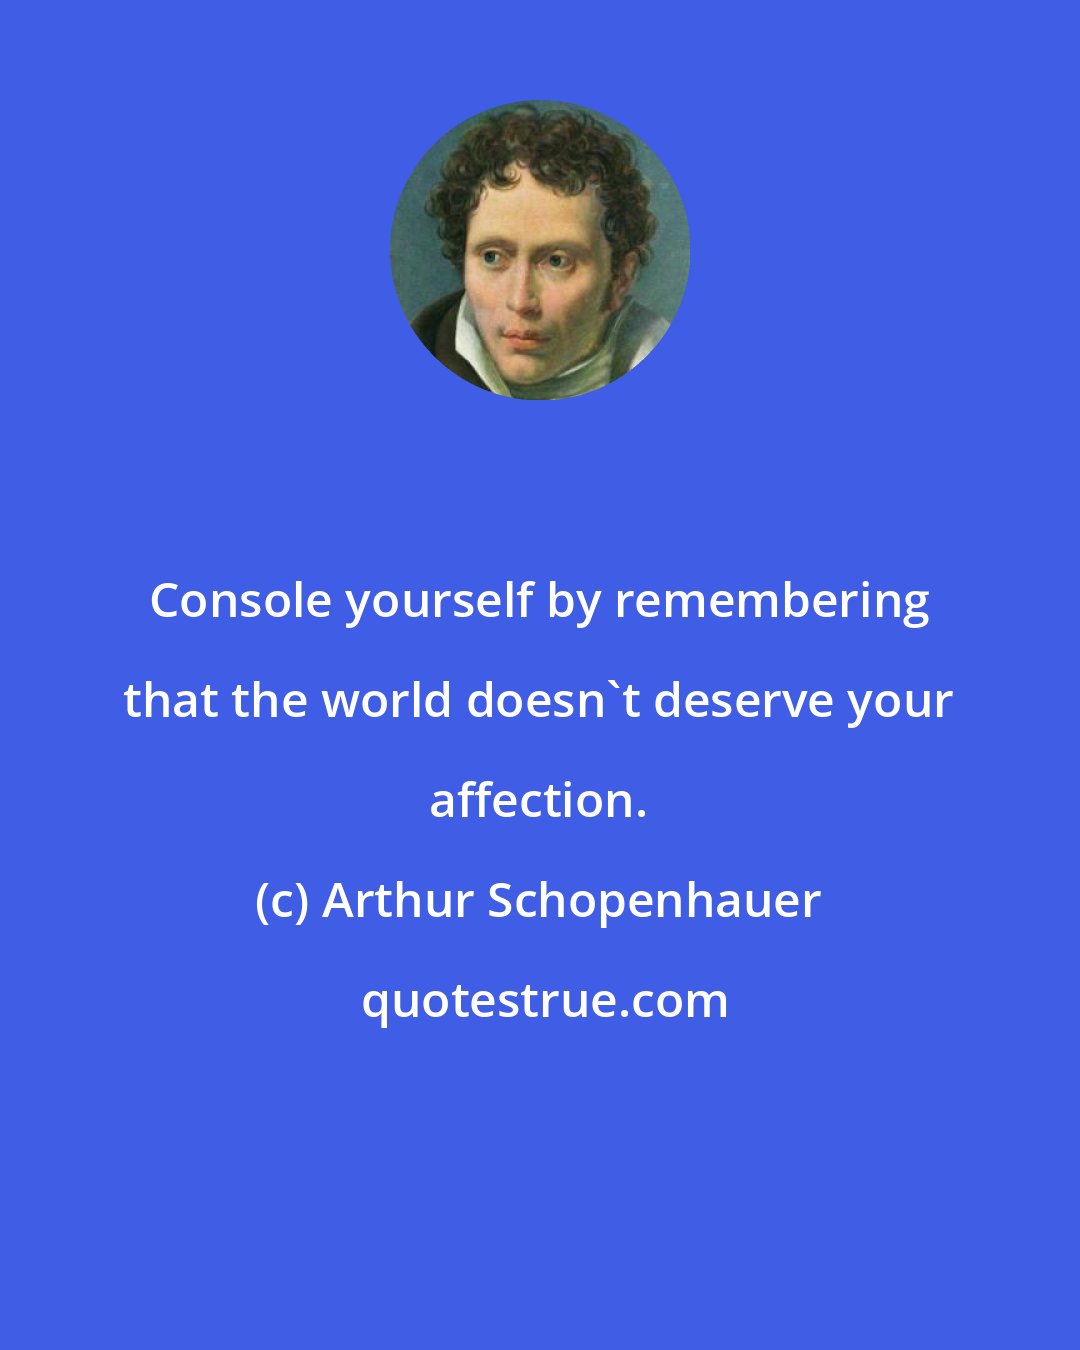 Arthur Schopenhauer: Console yourself by remembering that the world doesn't deserve your affection.